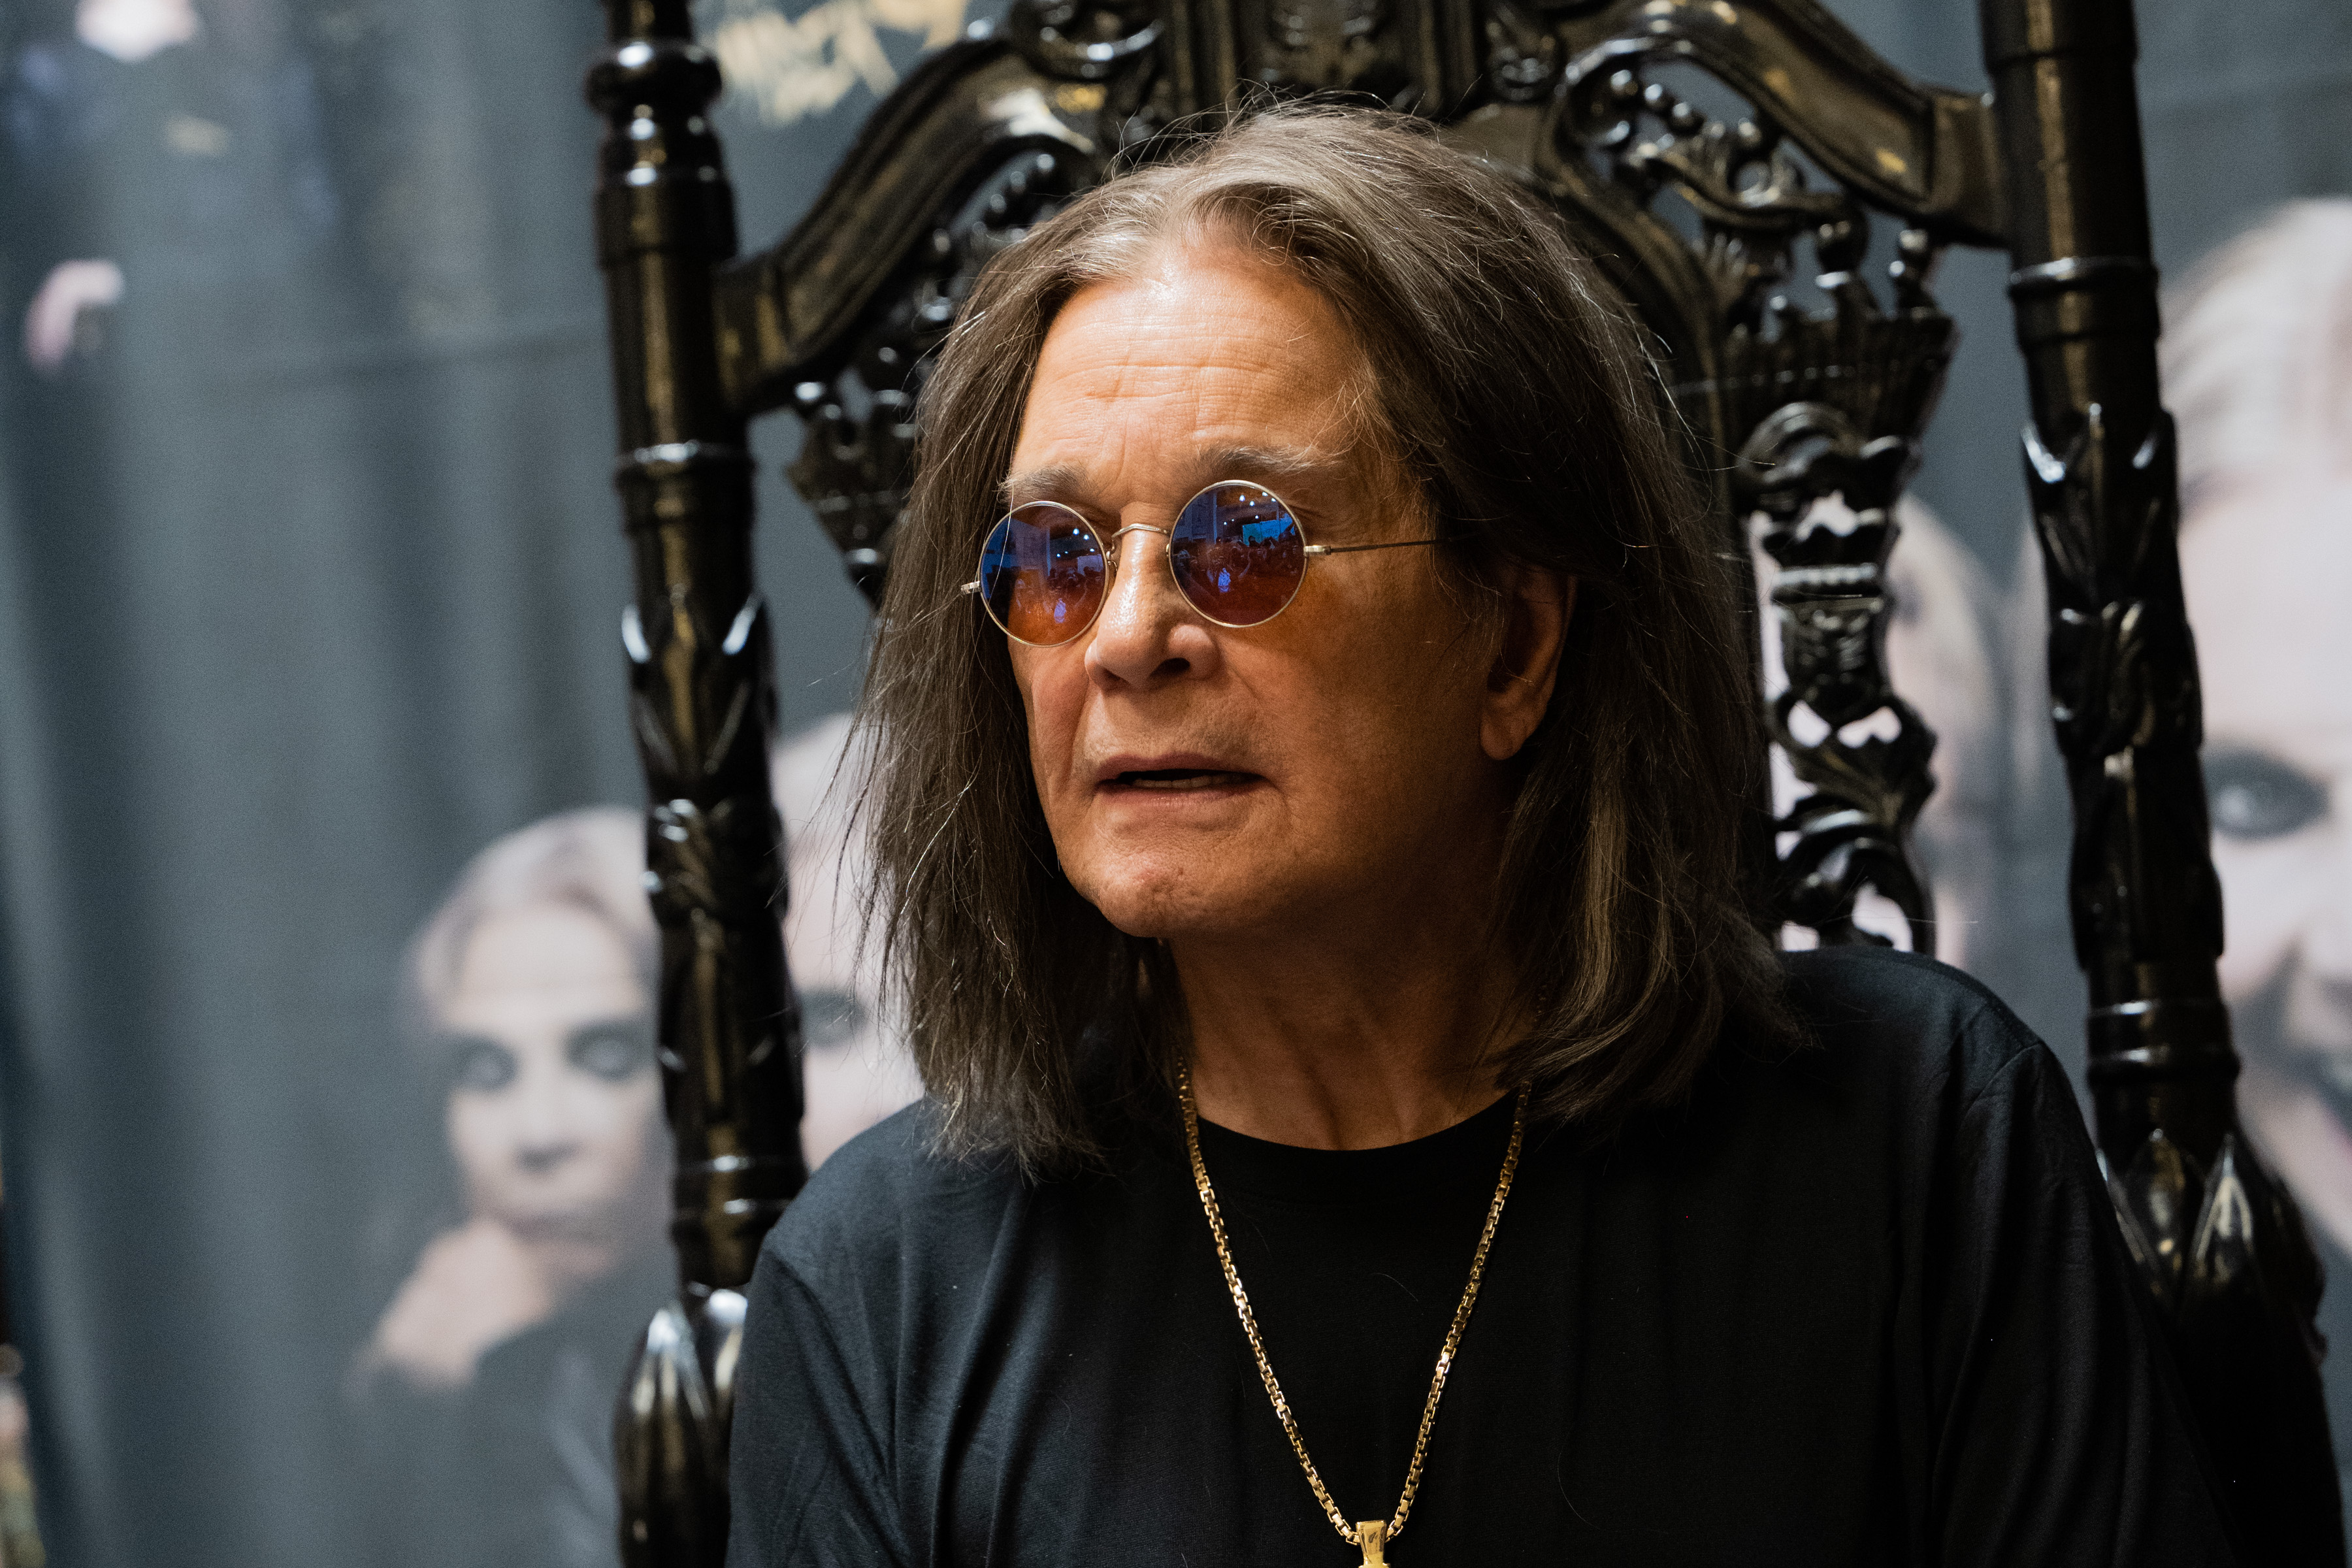 Ozzy Osbourne cancels all shows, is too ‘physically weak’ to tour